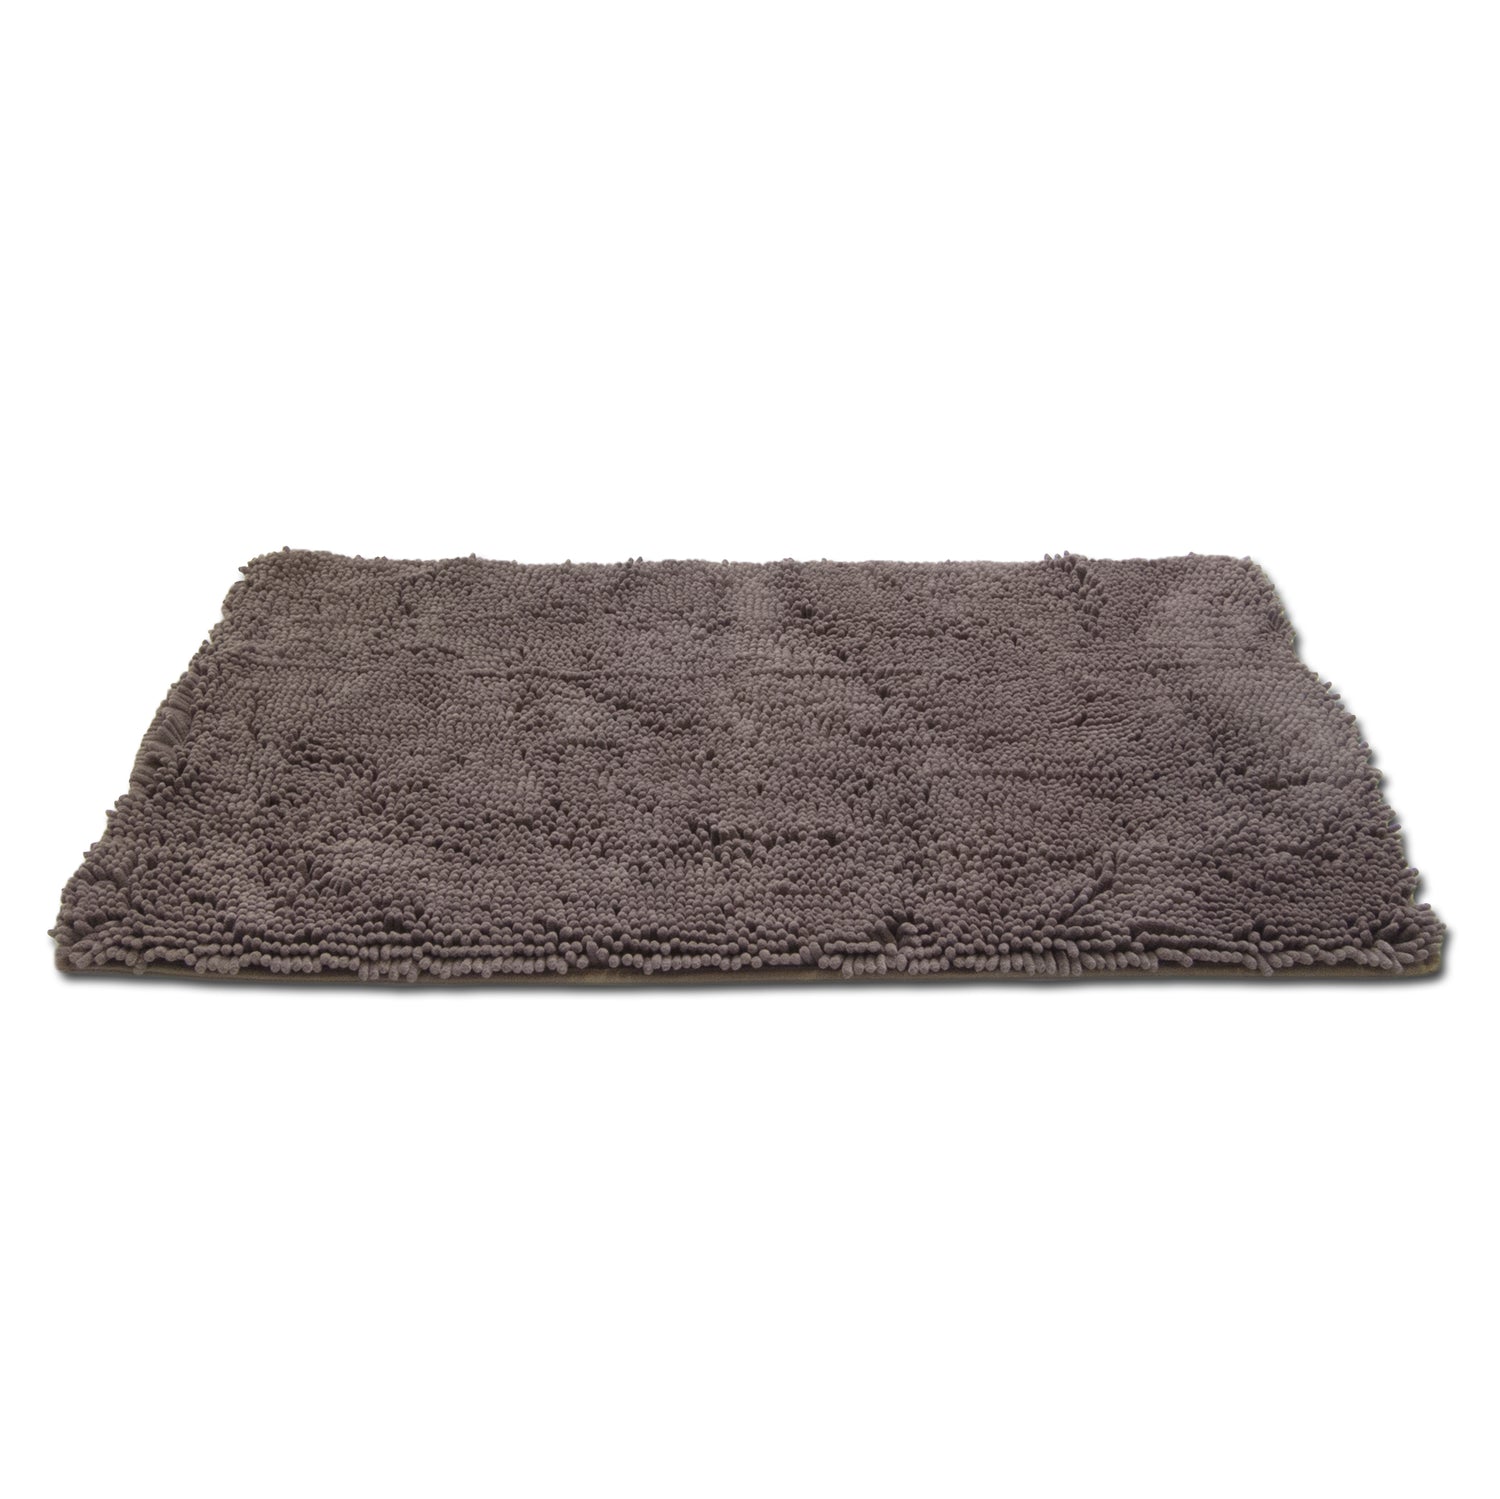 Grey dog mat that is also a towel.  The highest quailyt microfiber to soak up the mess.